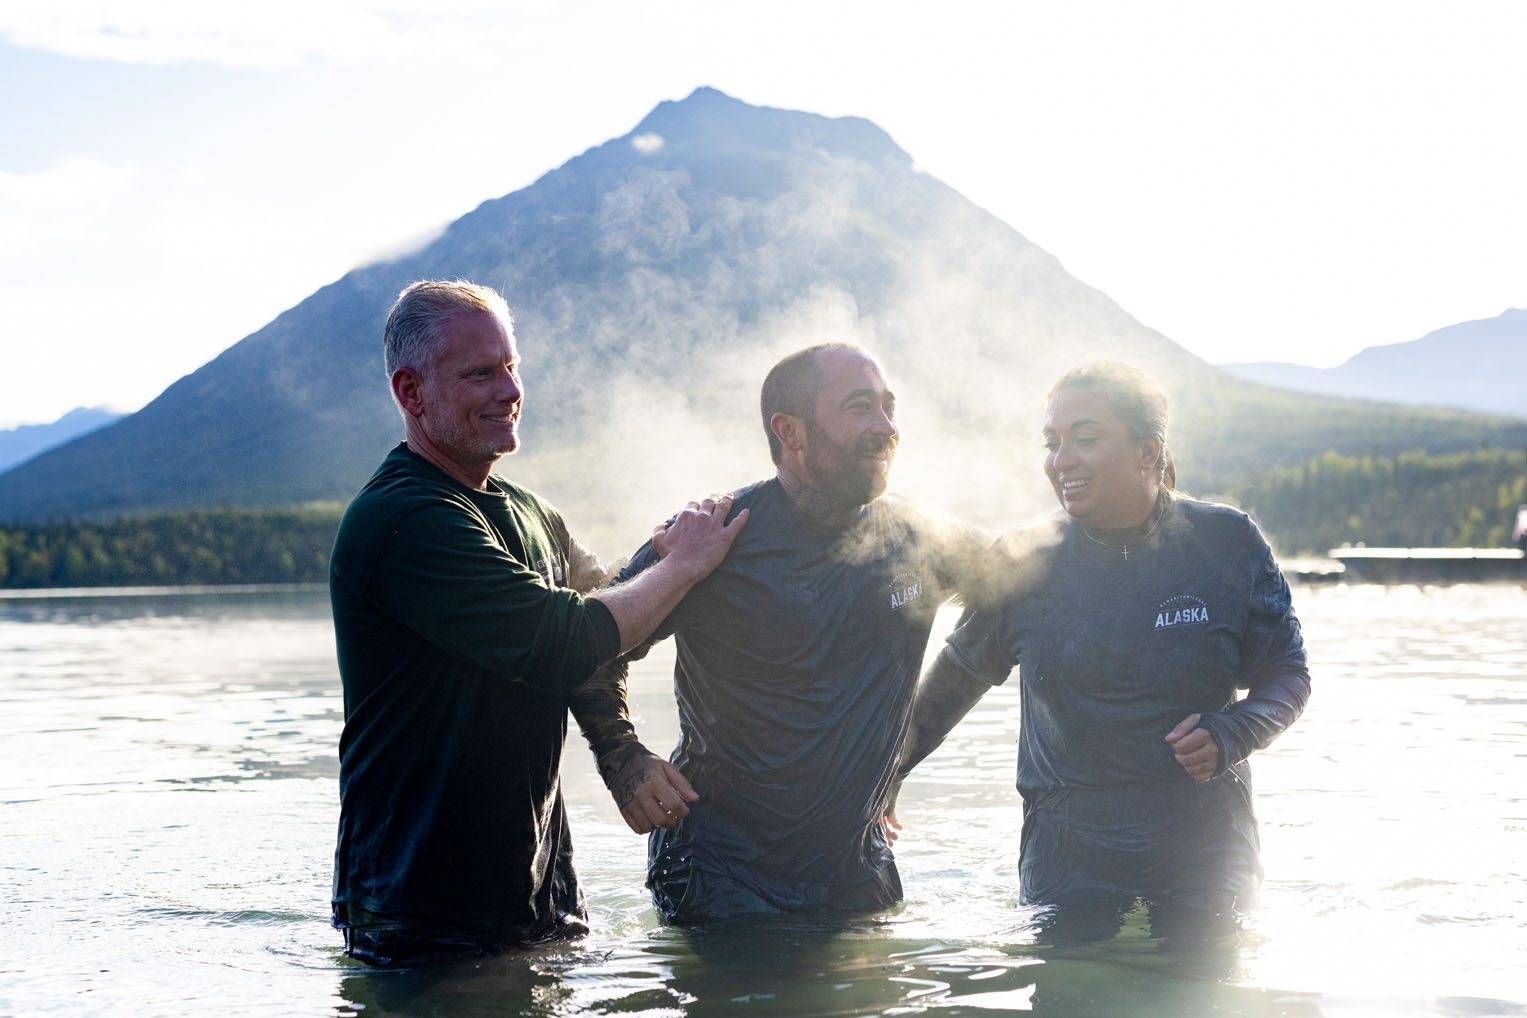 The Tuckers celebrated new life together, marked by baptism in that freezing lake.